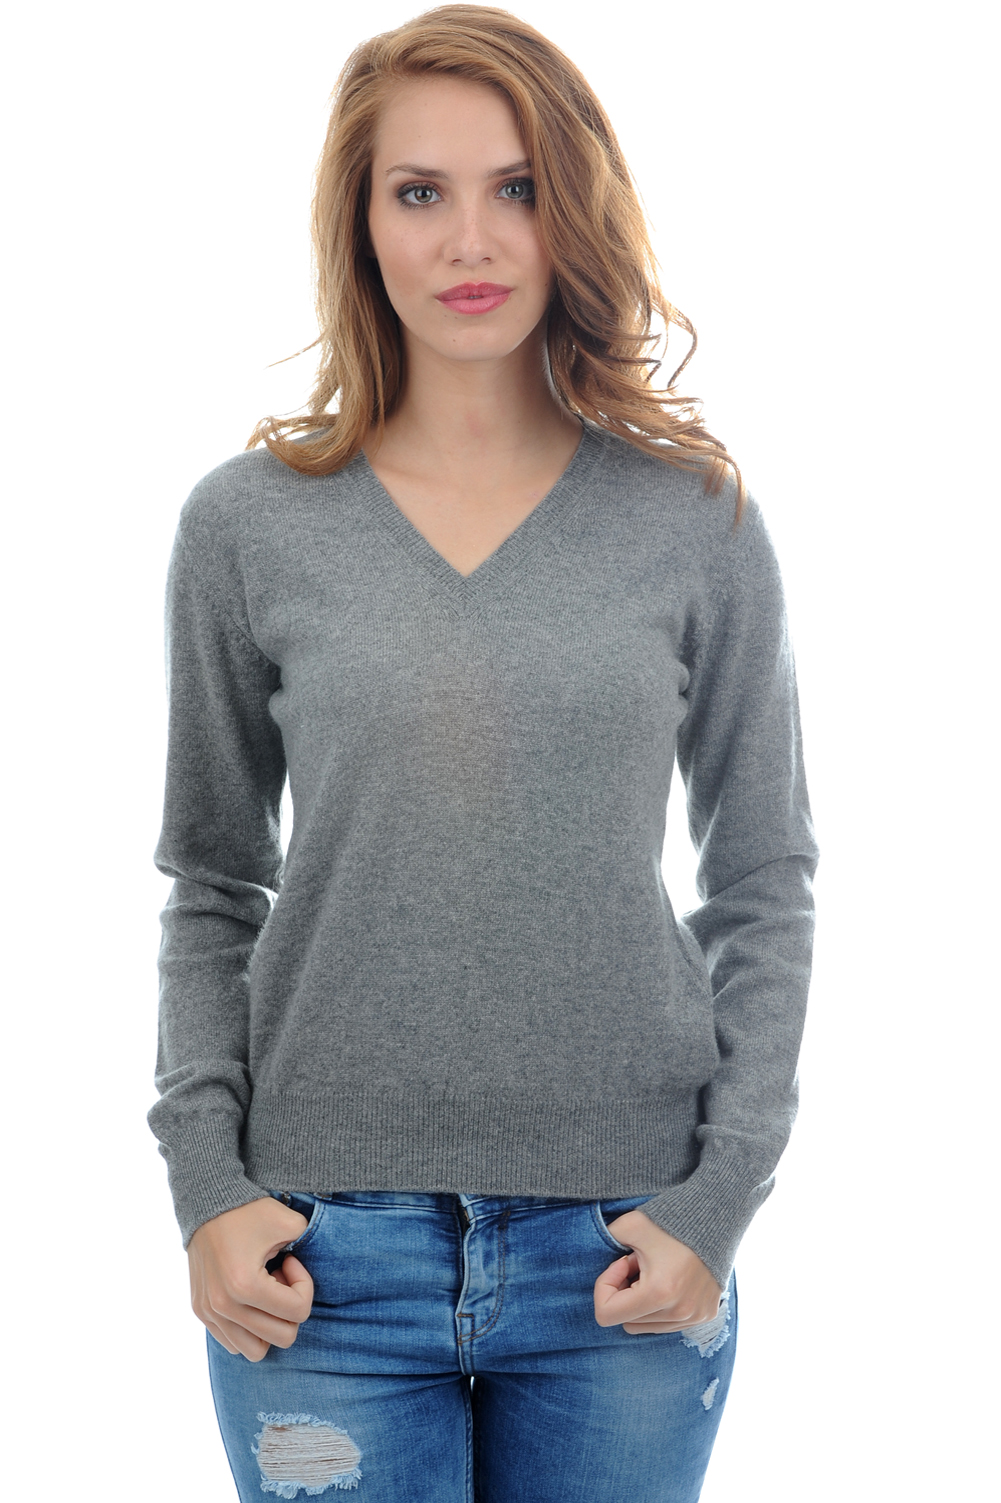 Cachemire pull femme col v faustine gris chine 2xl